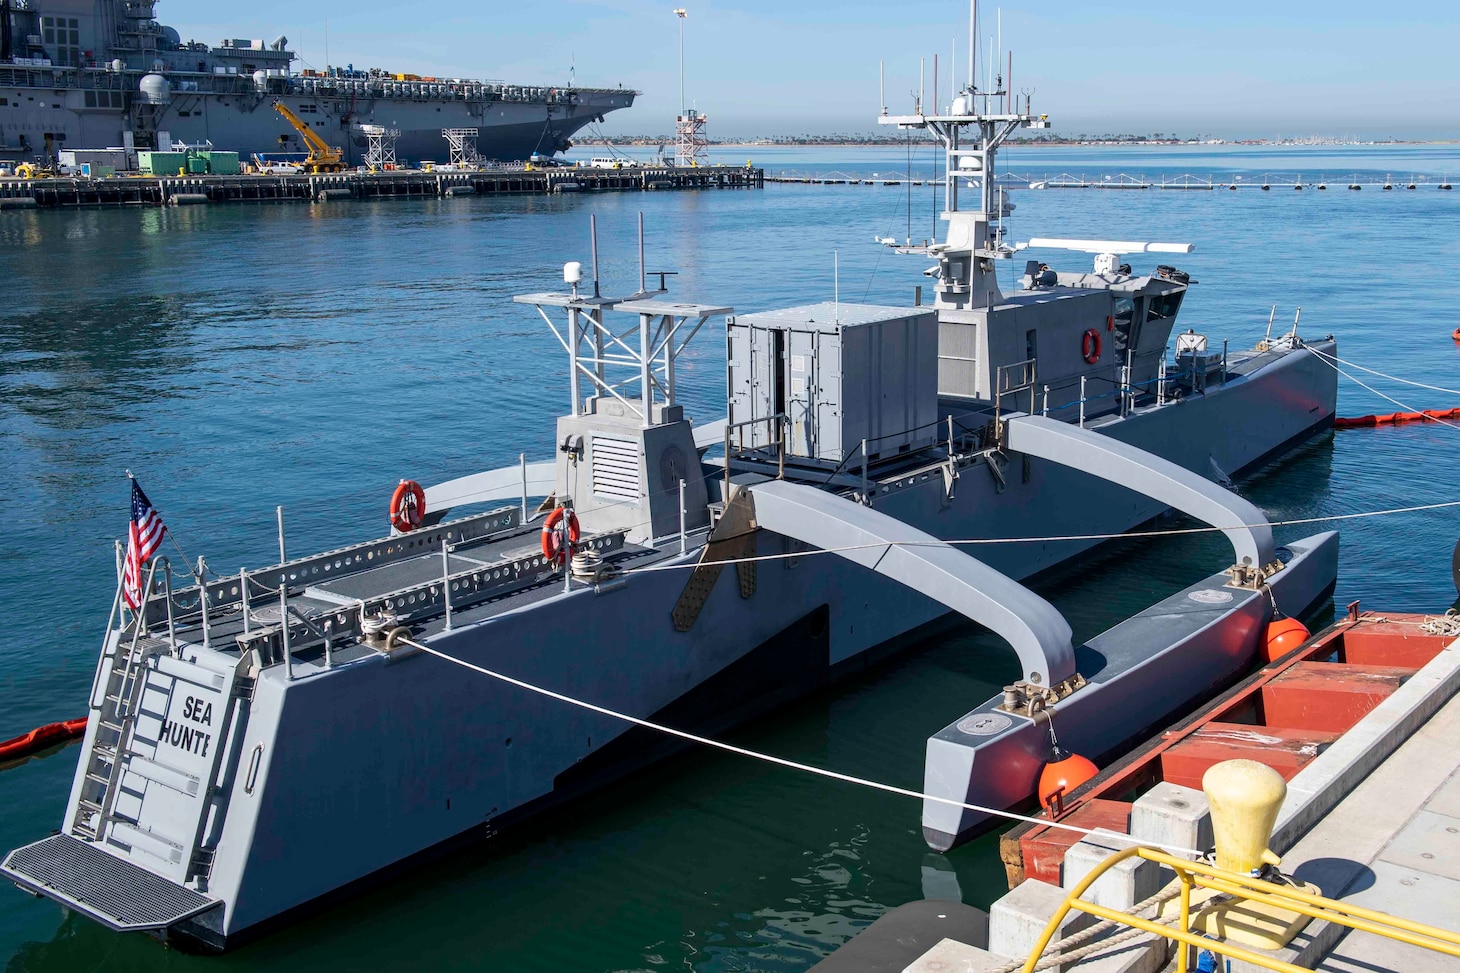 The medium-displacement unmanned surface vessel Sea Hunter sits pierside at Naval Base San Diego, during the Unmanned Surface Vessel Division (USDIV) One Establishment ceremony.